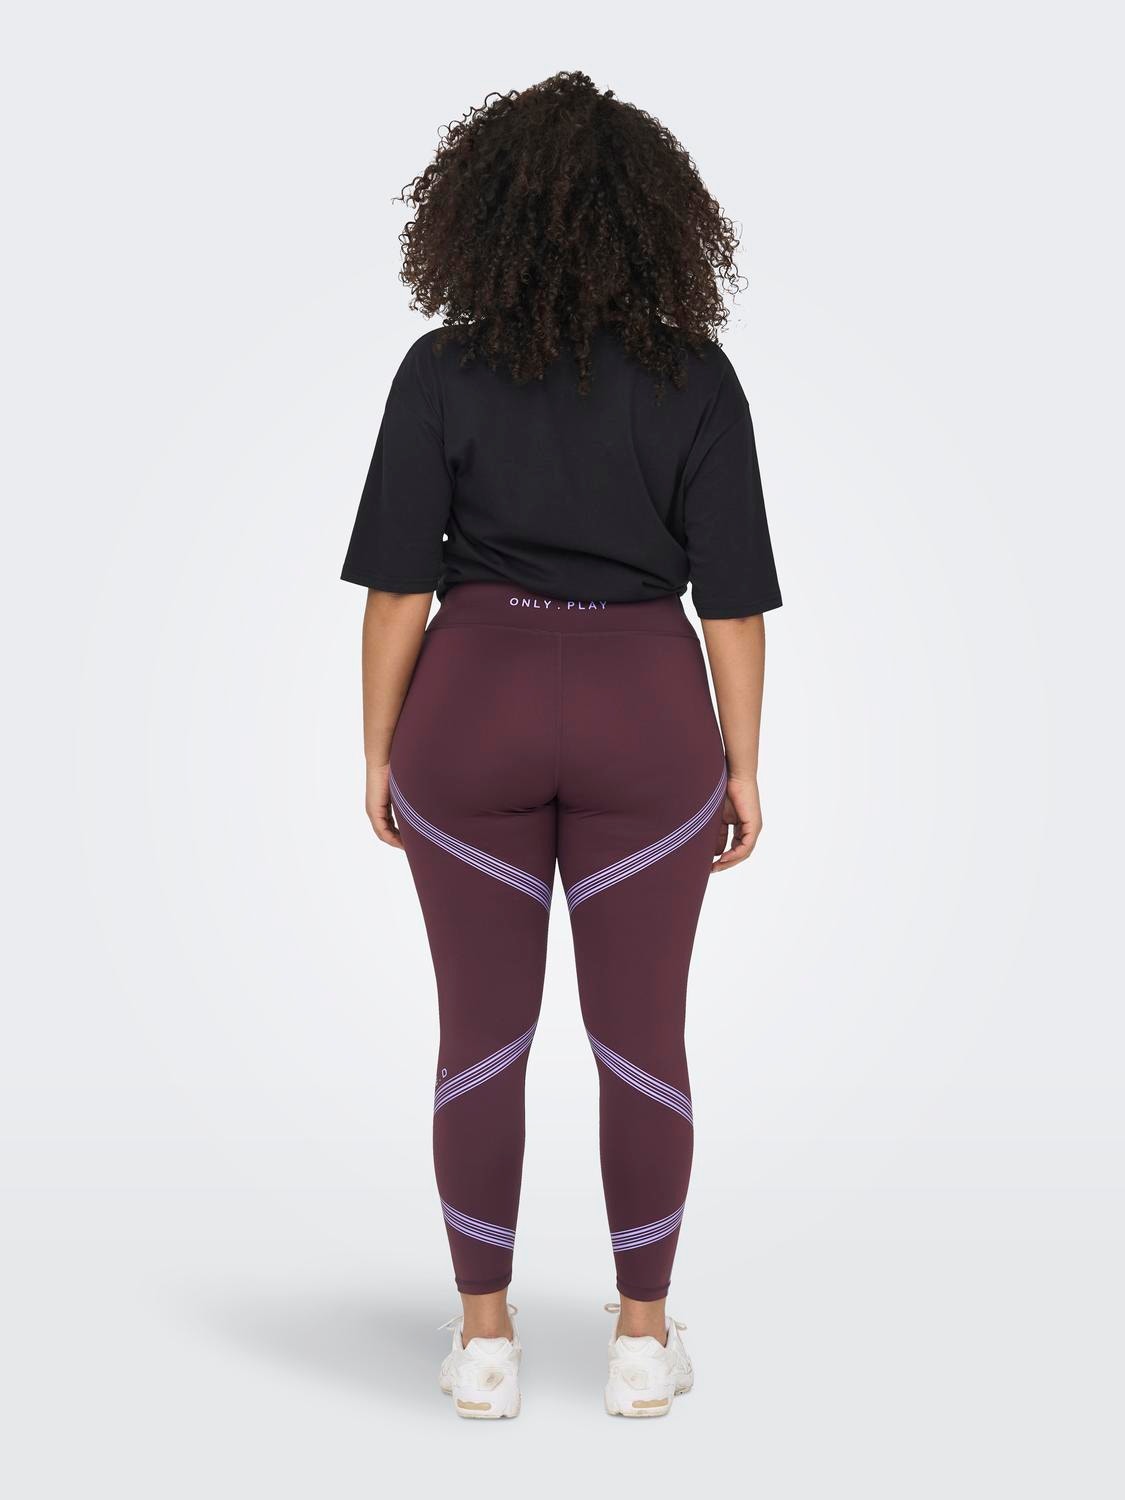 Slim fit Curve Legging 30% discount! | ONLY®